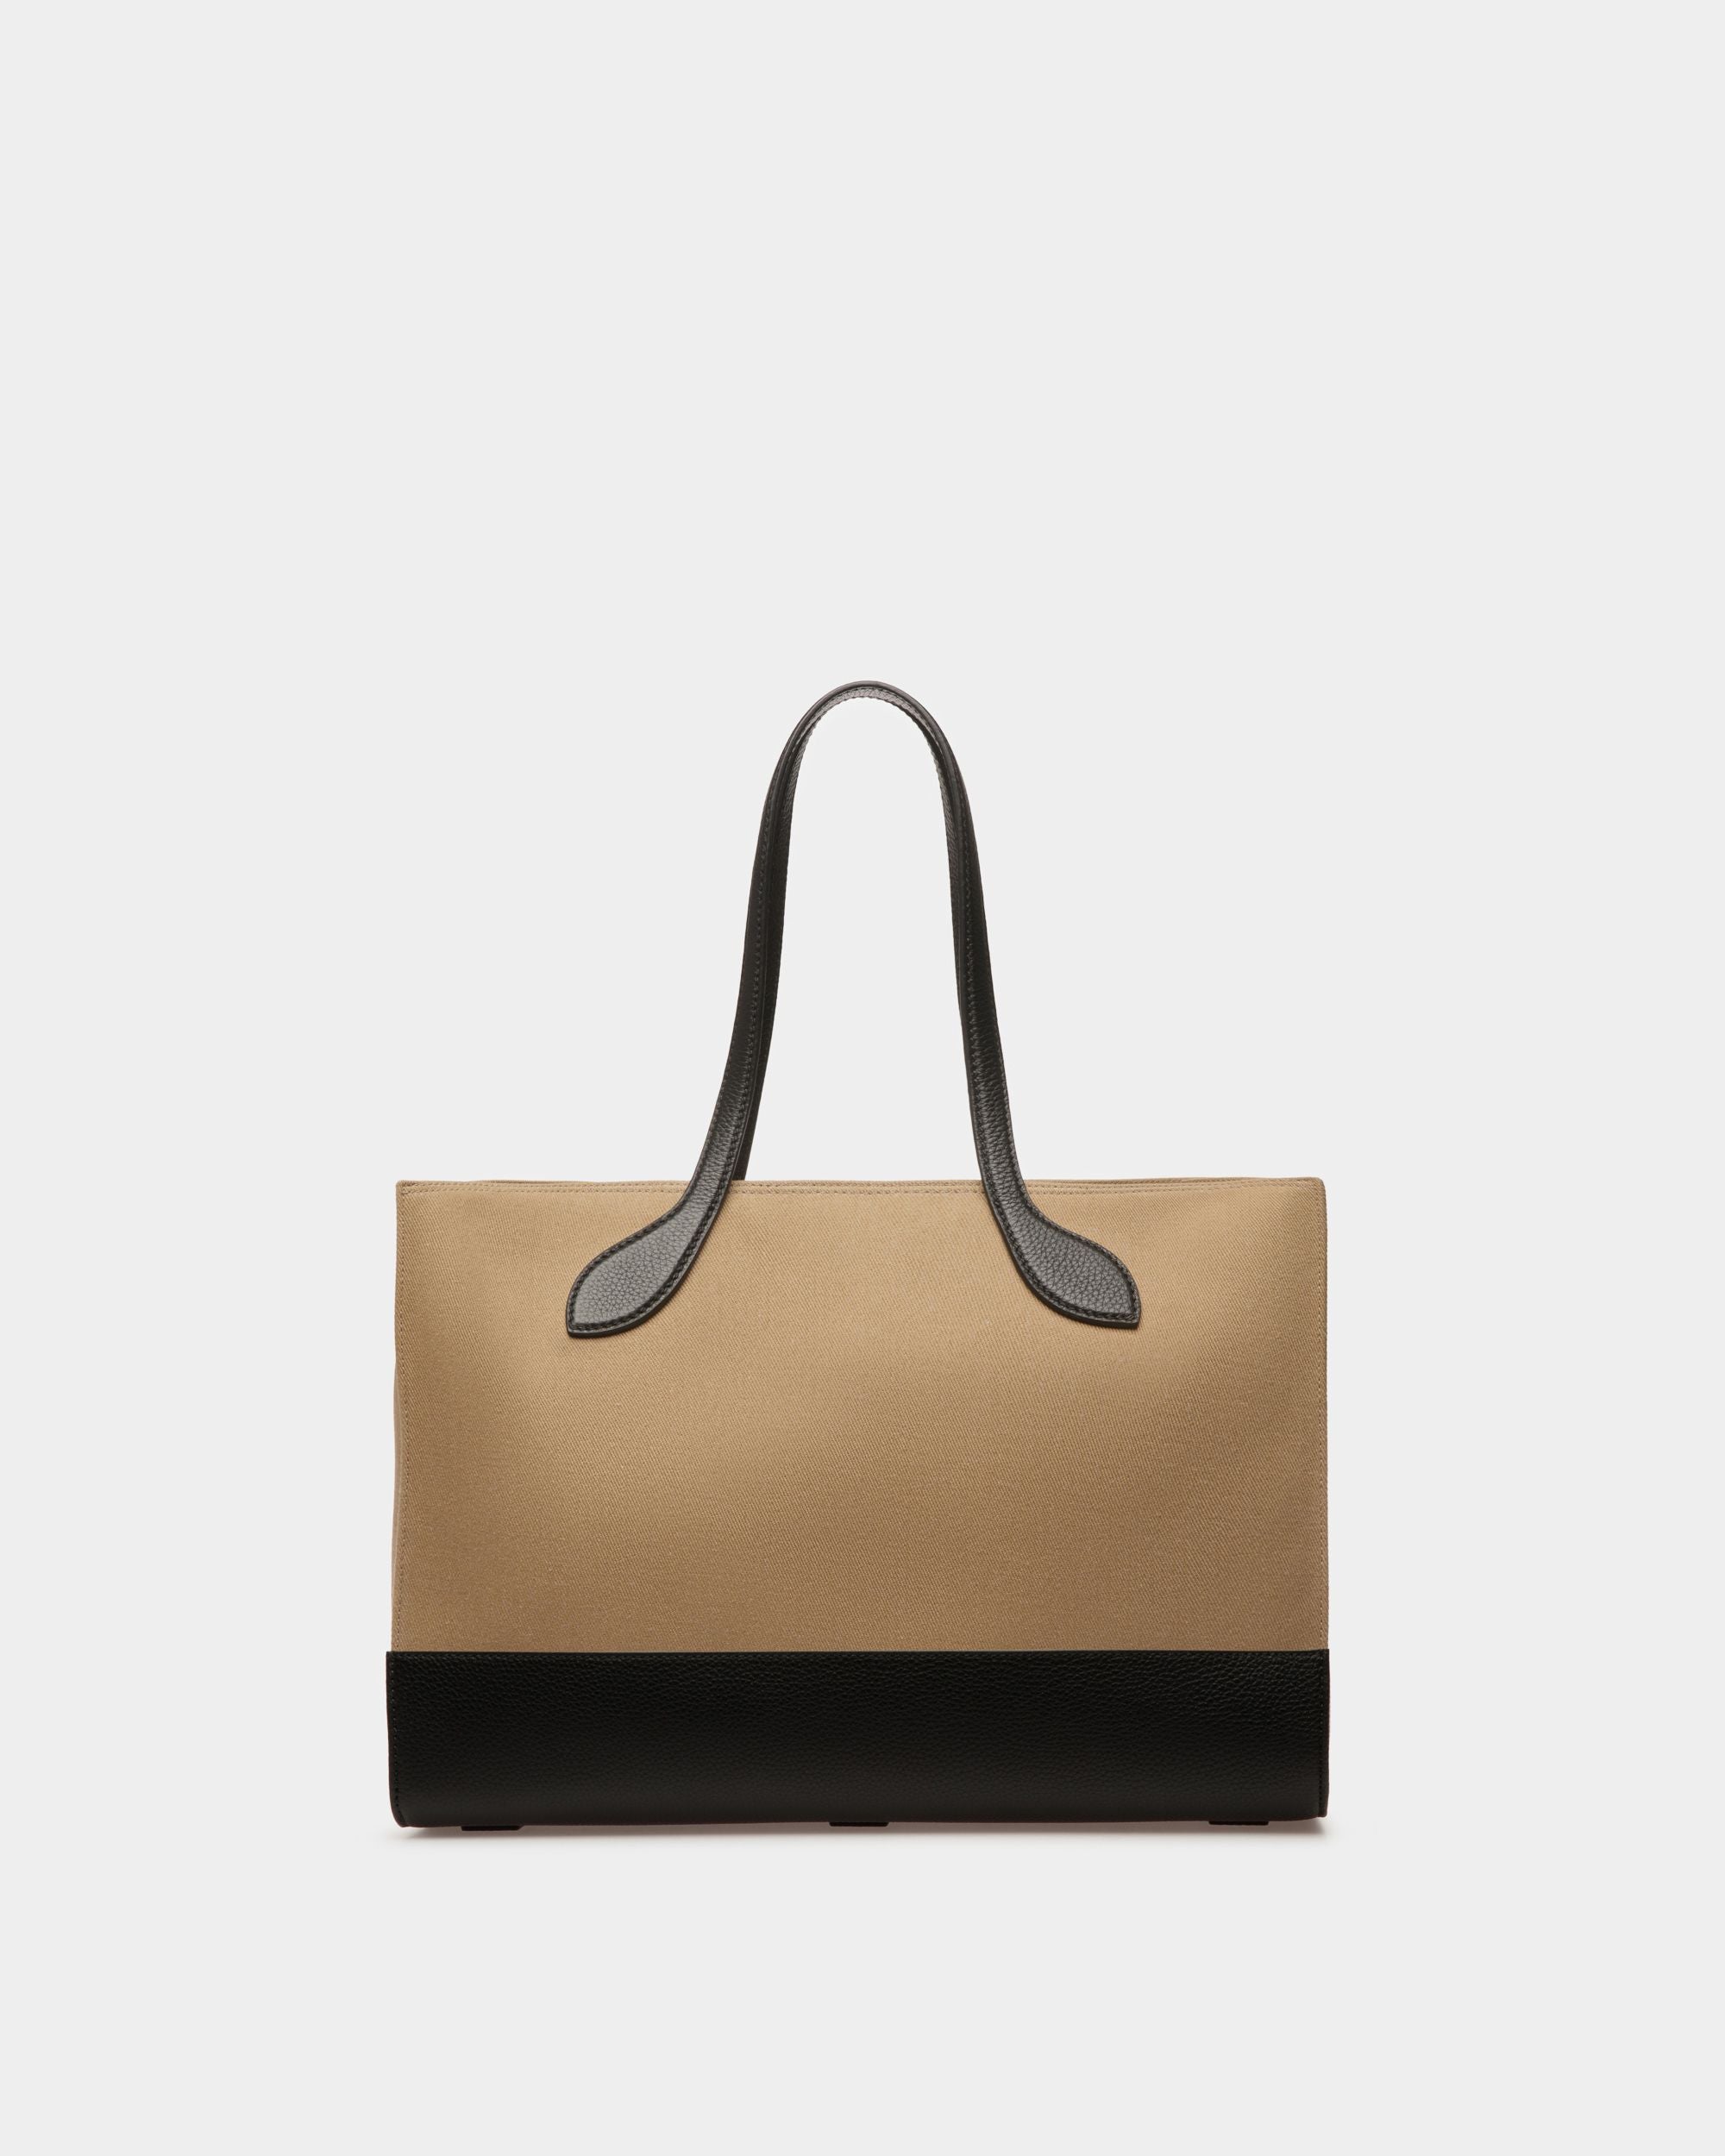 Keep On Ew | Women's Tote Bag | Sand And Black Fabric | Bally | Still Life Back